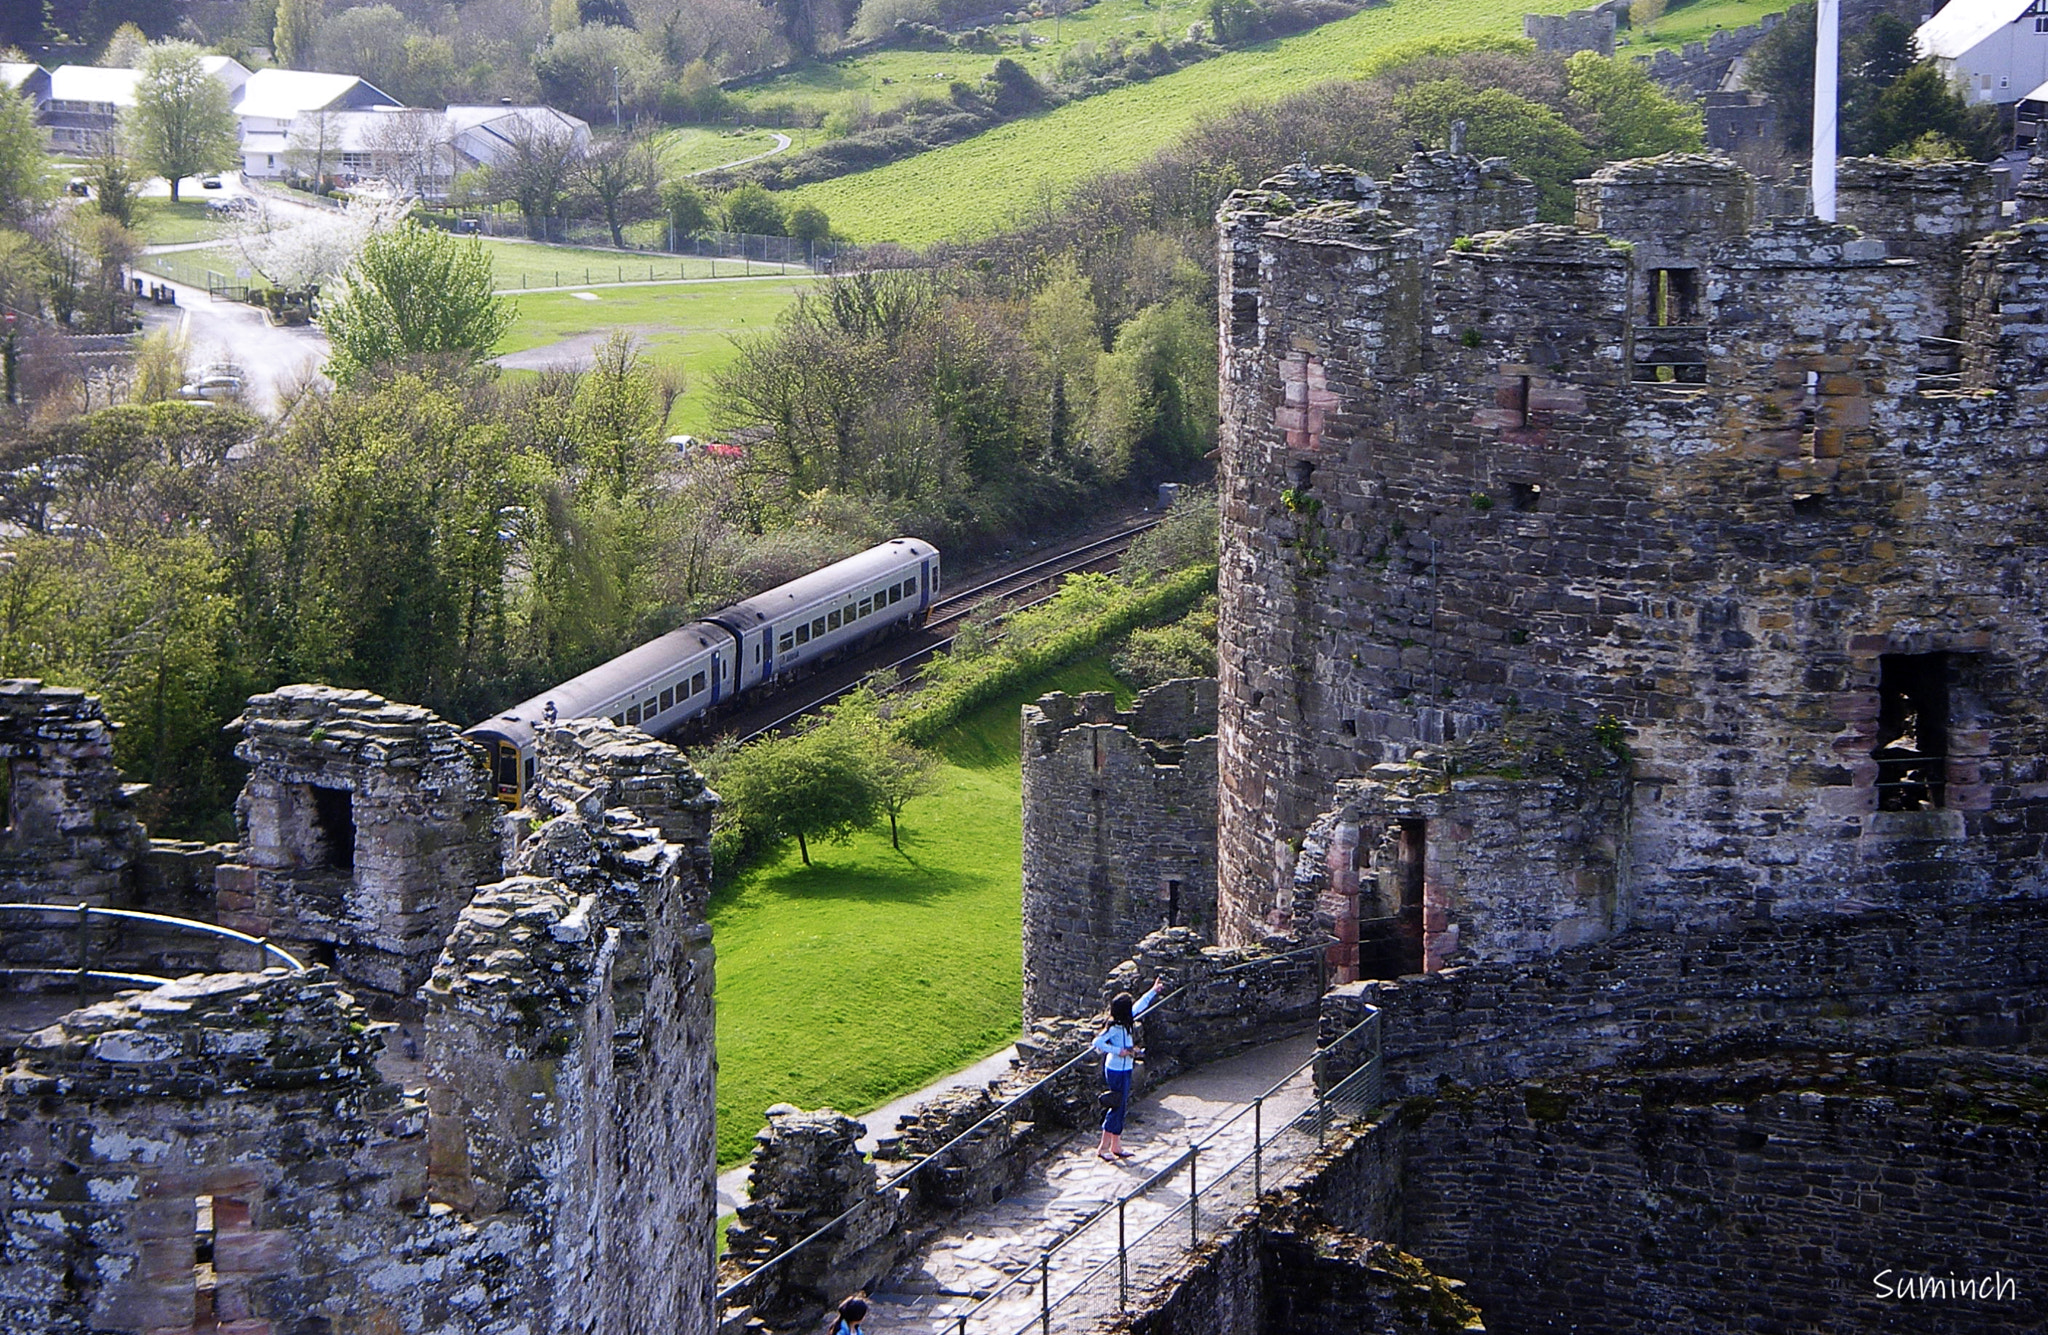 Olympus SP700 sample photo. Train at conwy castle photography